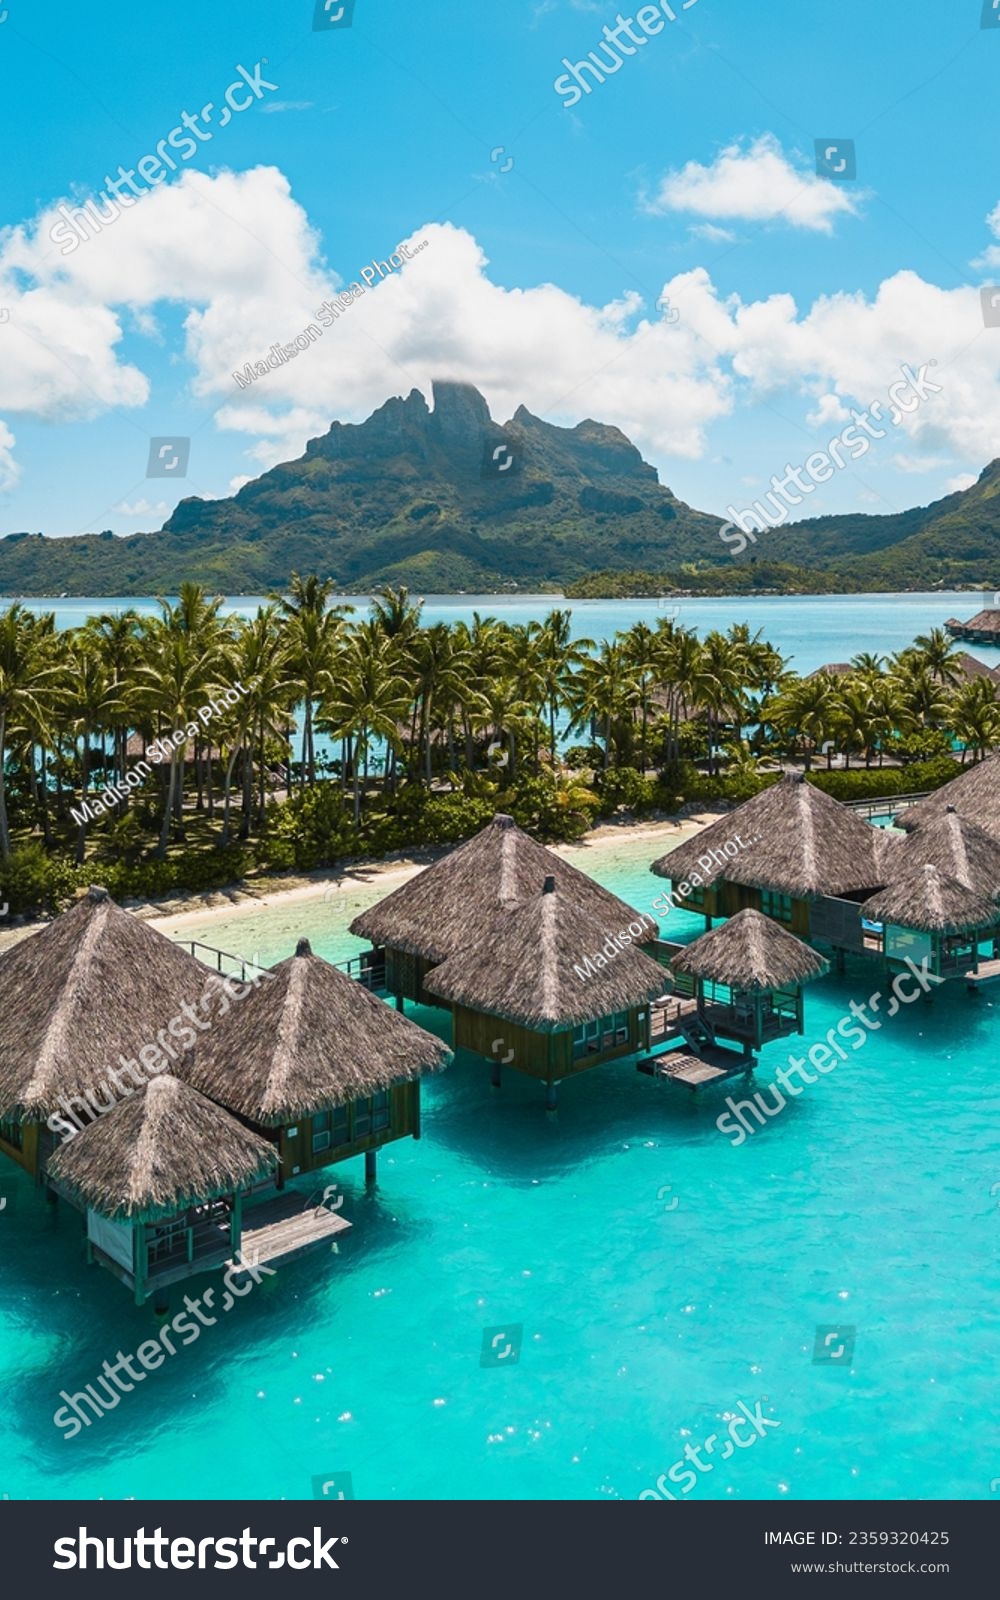 Aerial drone shot of the tropical island Bora Bora in French Polynesia with a resort, hut, beaches and palm trees  #2359320425